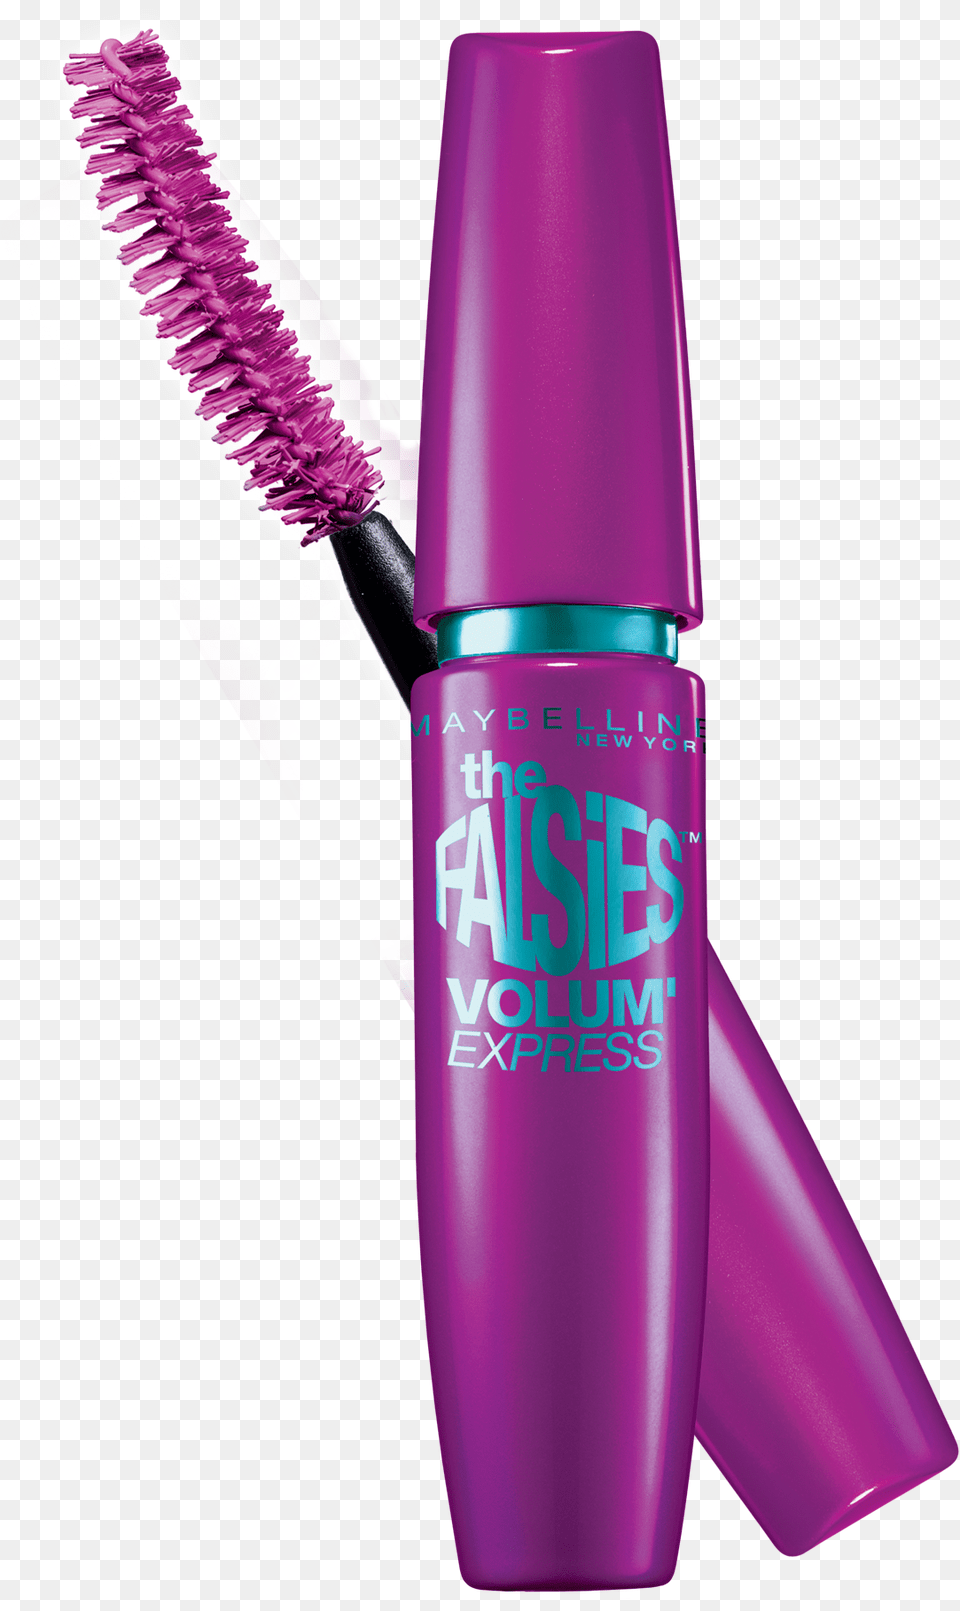 Maybelline Falsies Mascara Coupon Maybelline The Falsies Volum Express Waterproof, Cosmetics, Brush, Device, Tool Free Png